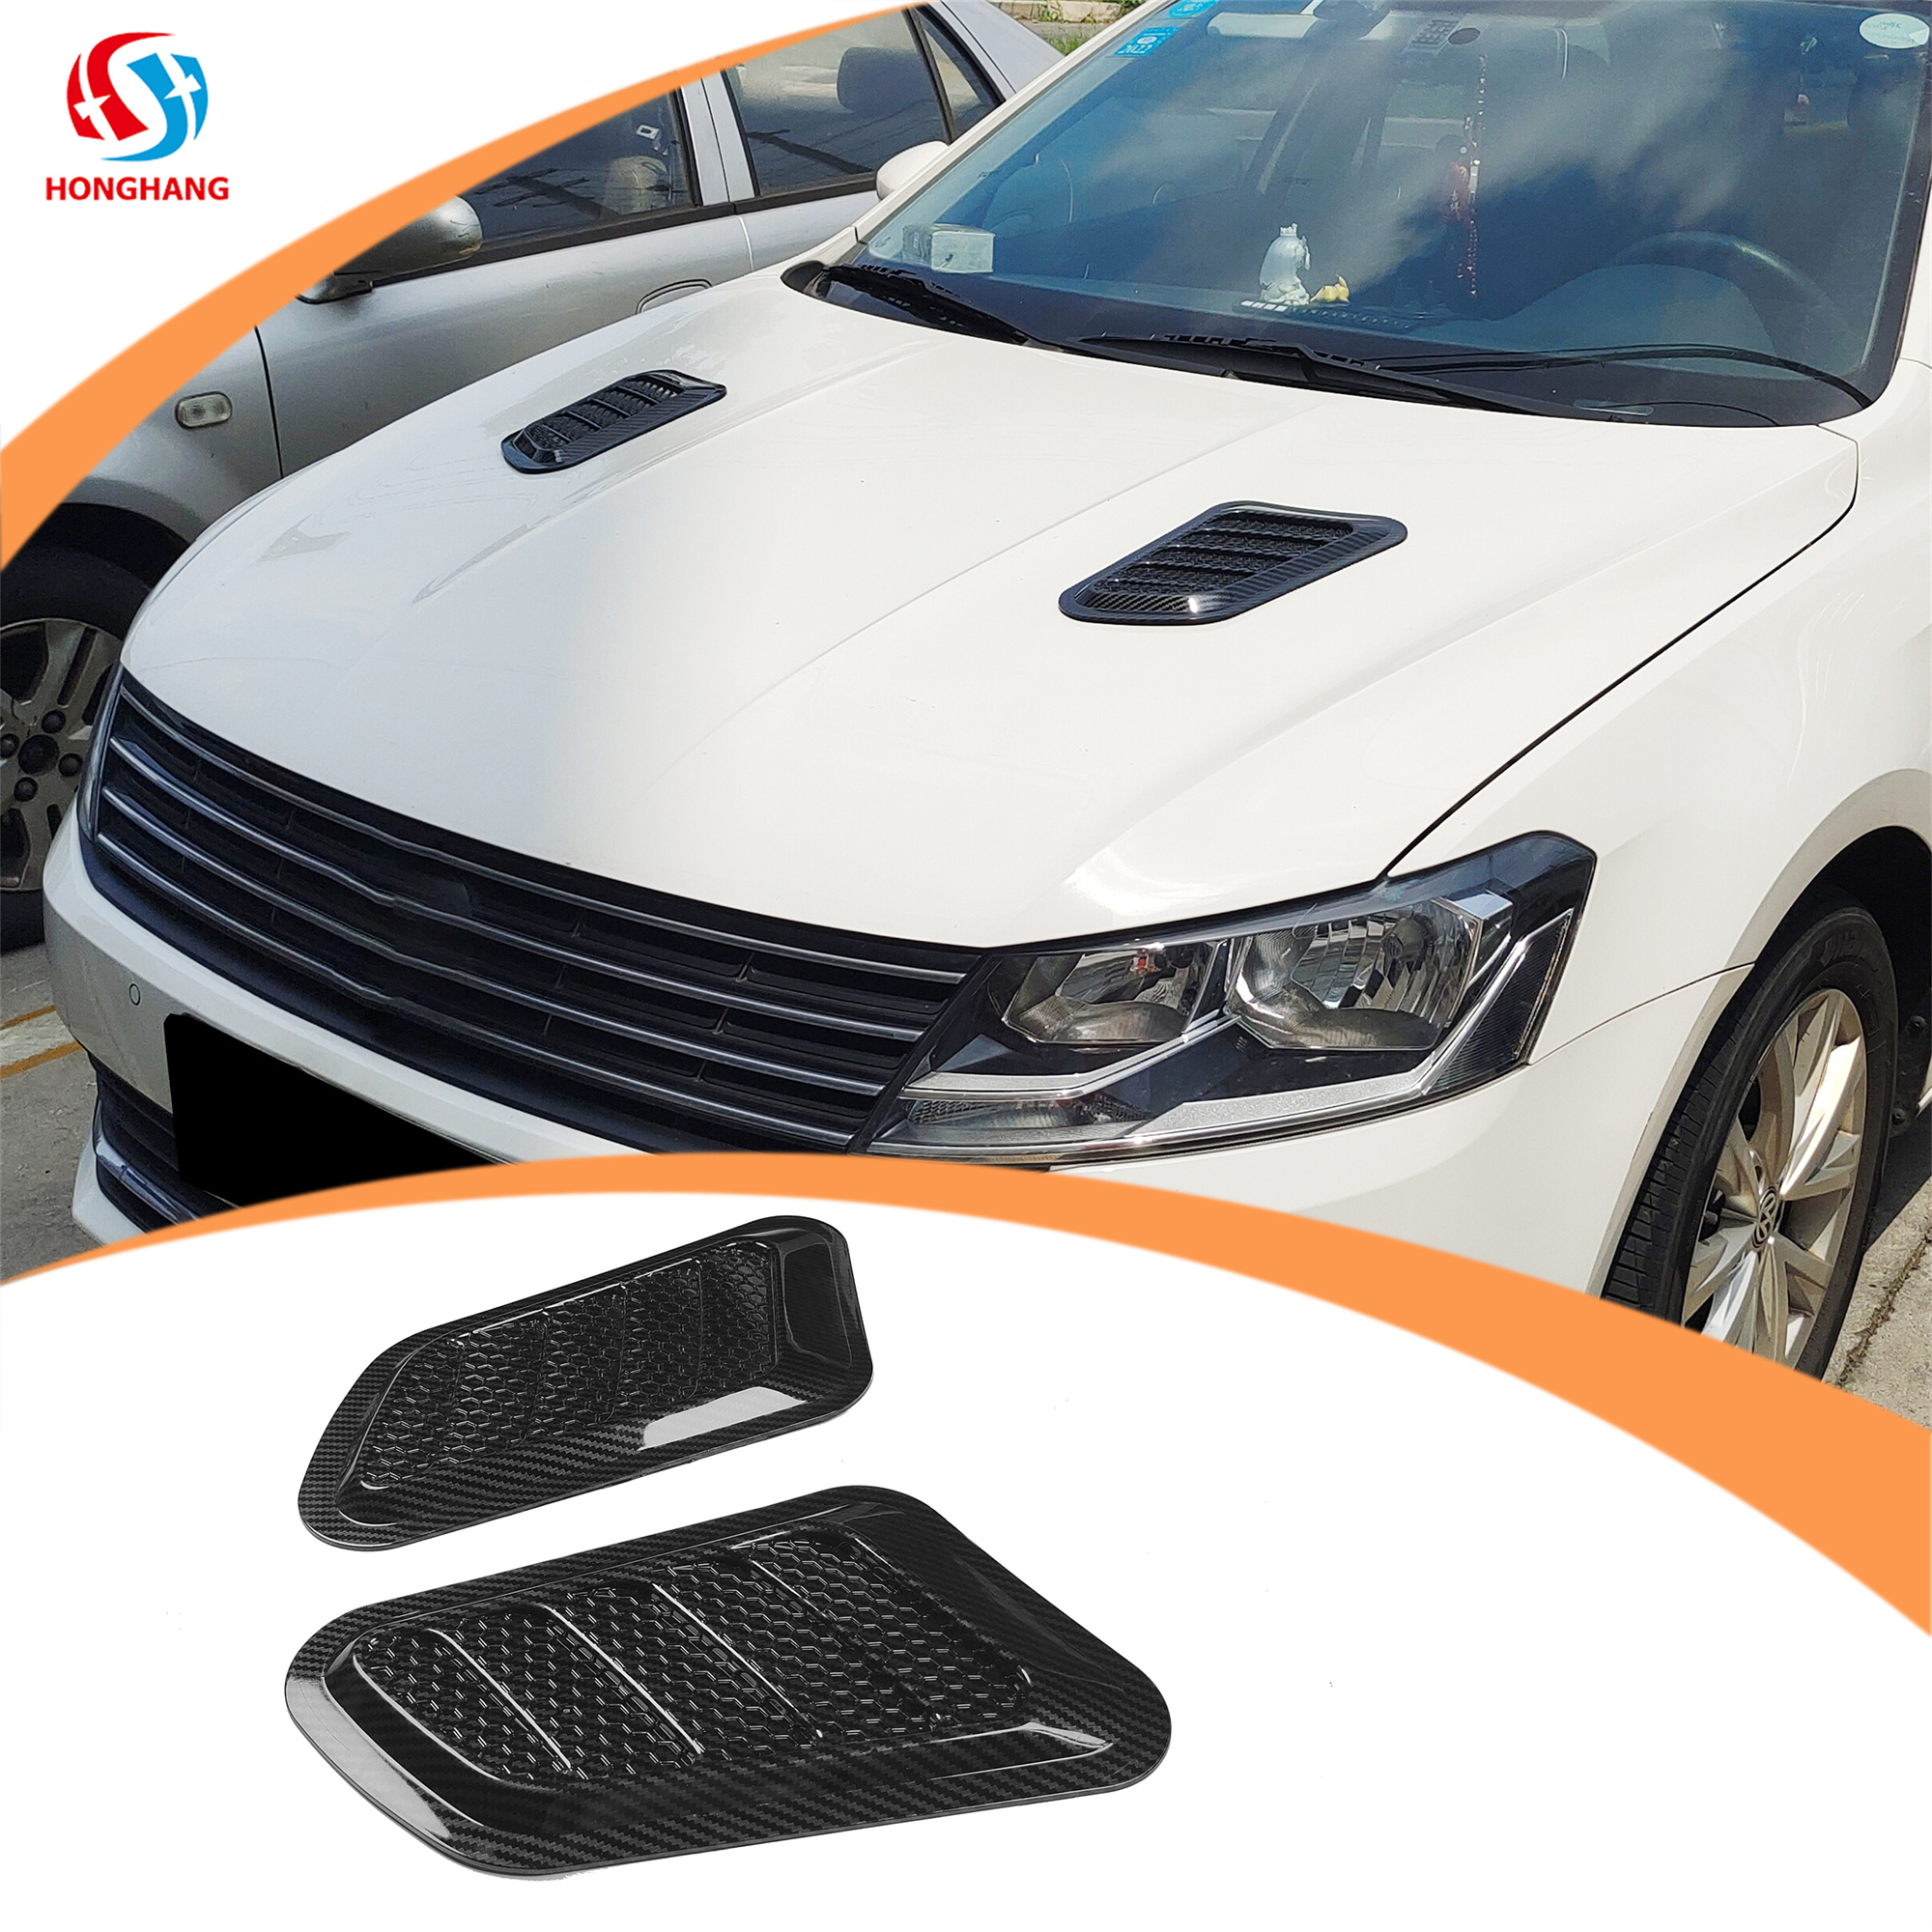 Type B Universal Air Outlet Hood Decoration Outlet For All Cars